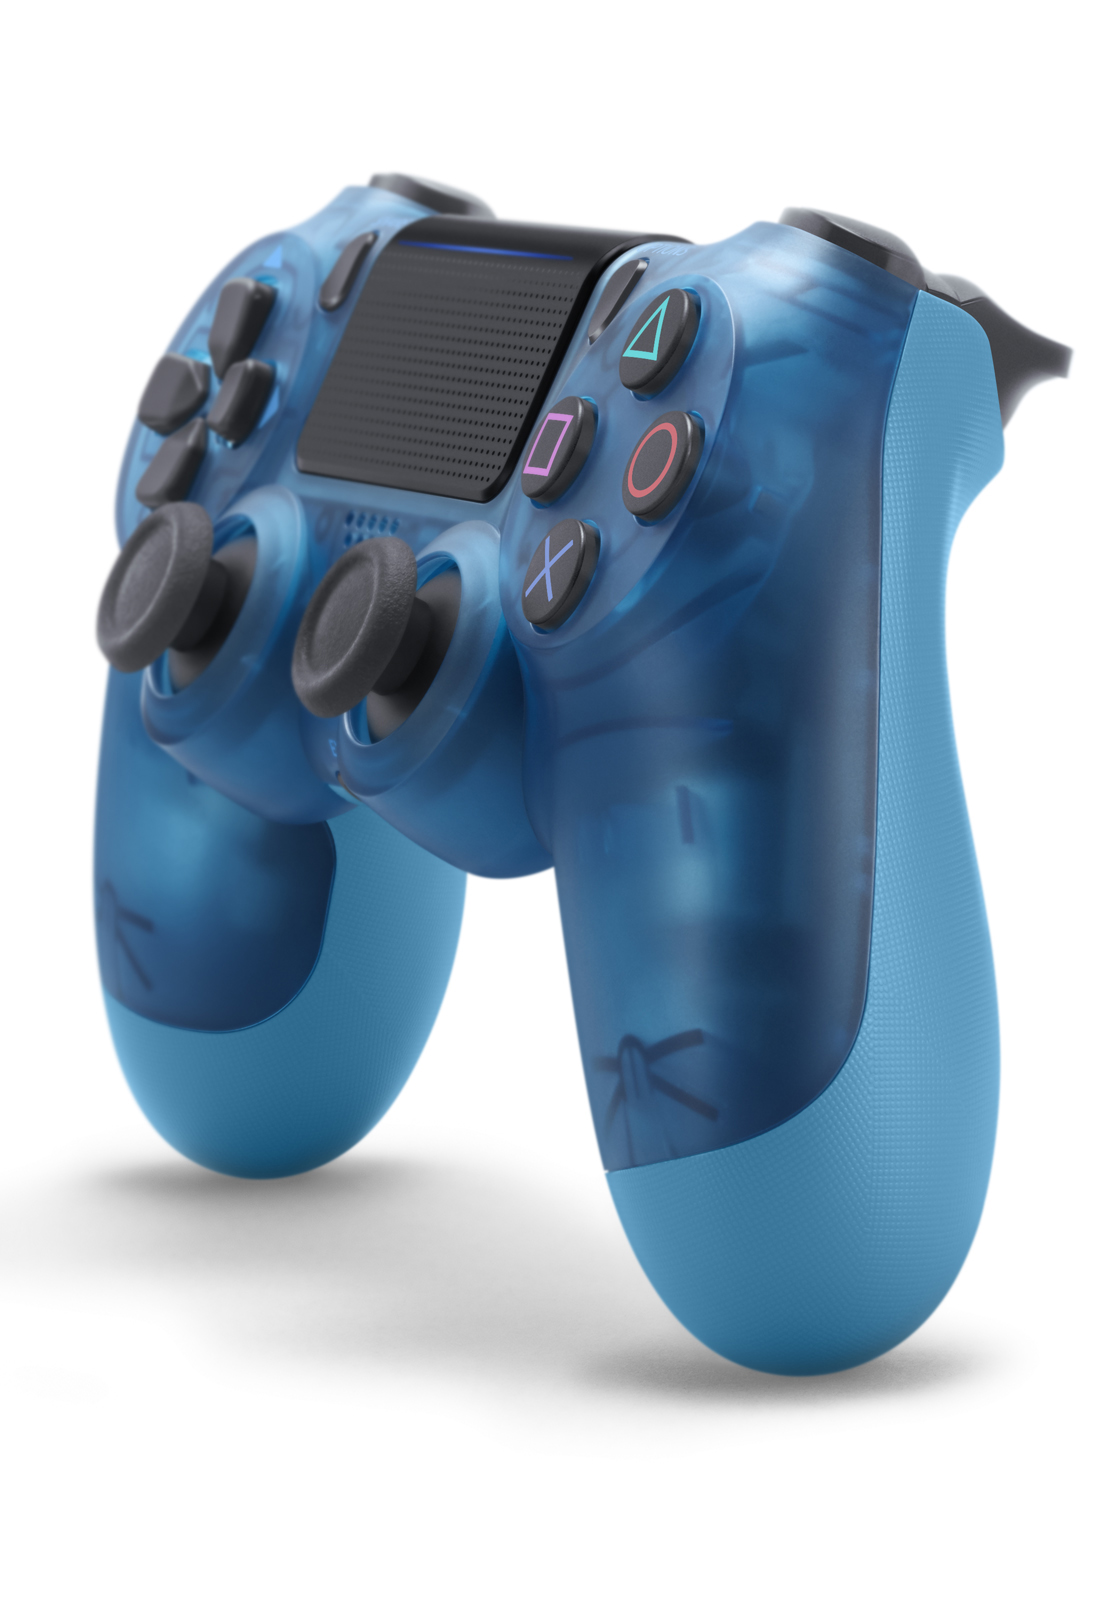 Sony PlayStation 4 DualShock 4 Controller, Blue Crystal, WMT Exclusive - image 4 of 6